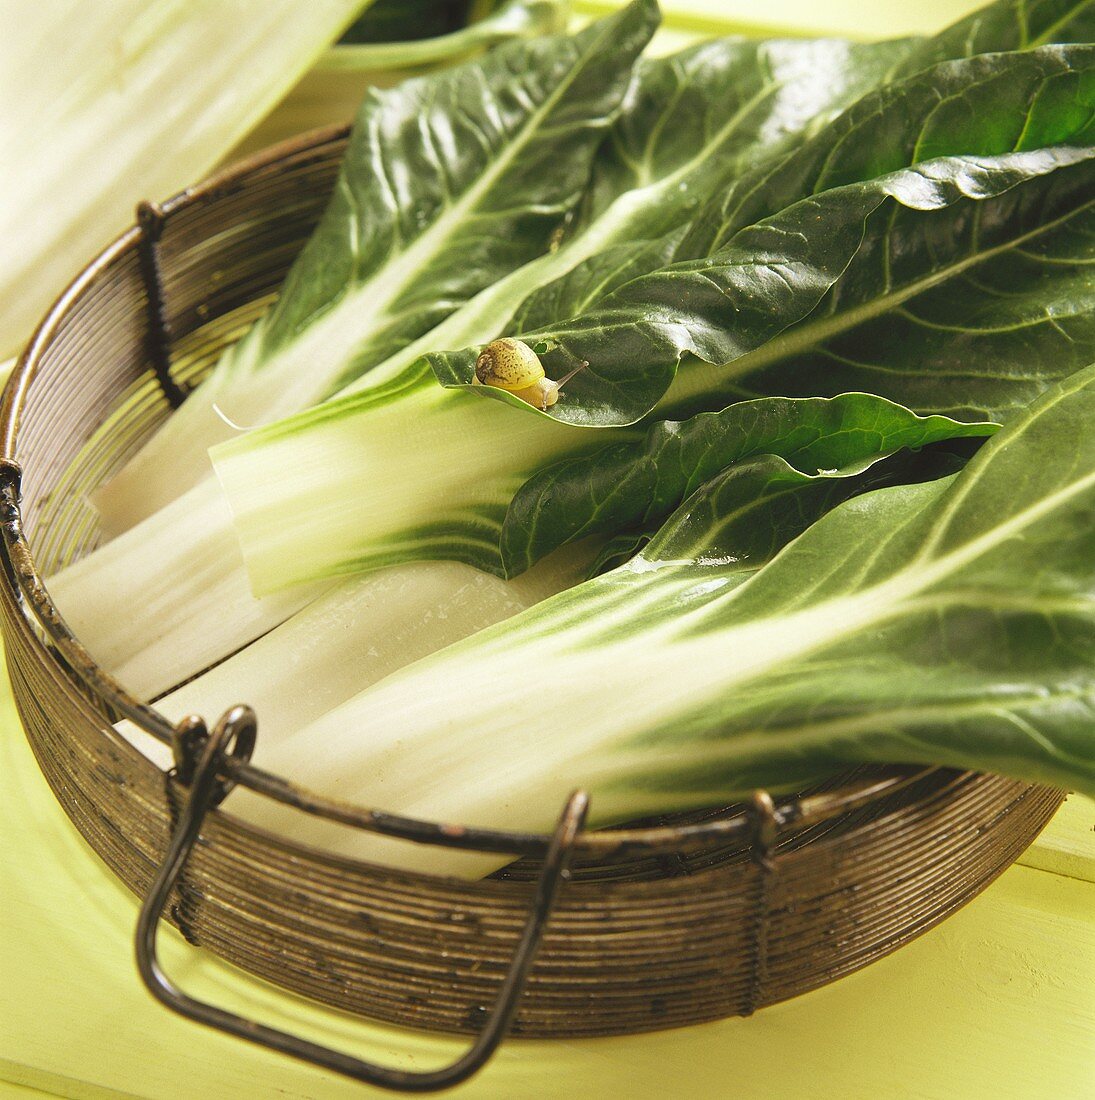 Chard Leaves with a Snail in a Basket